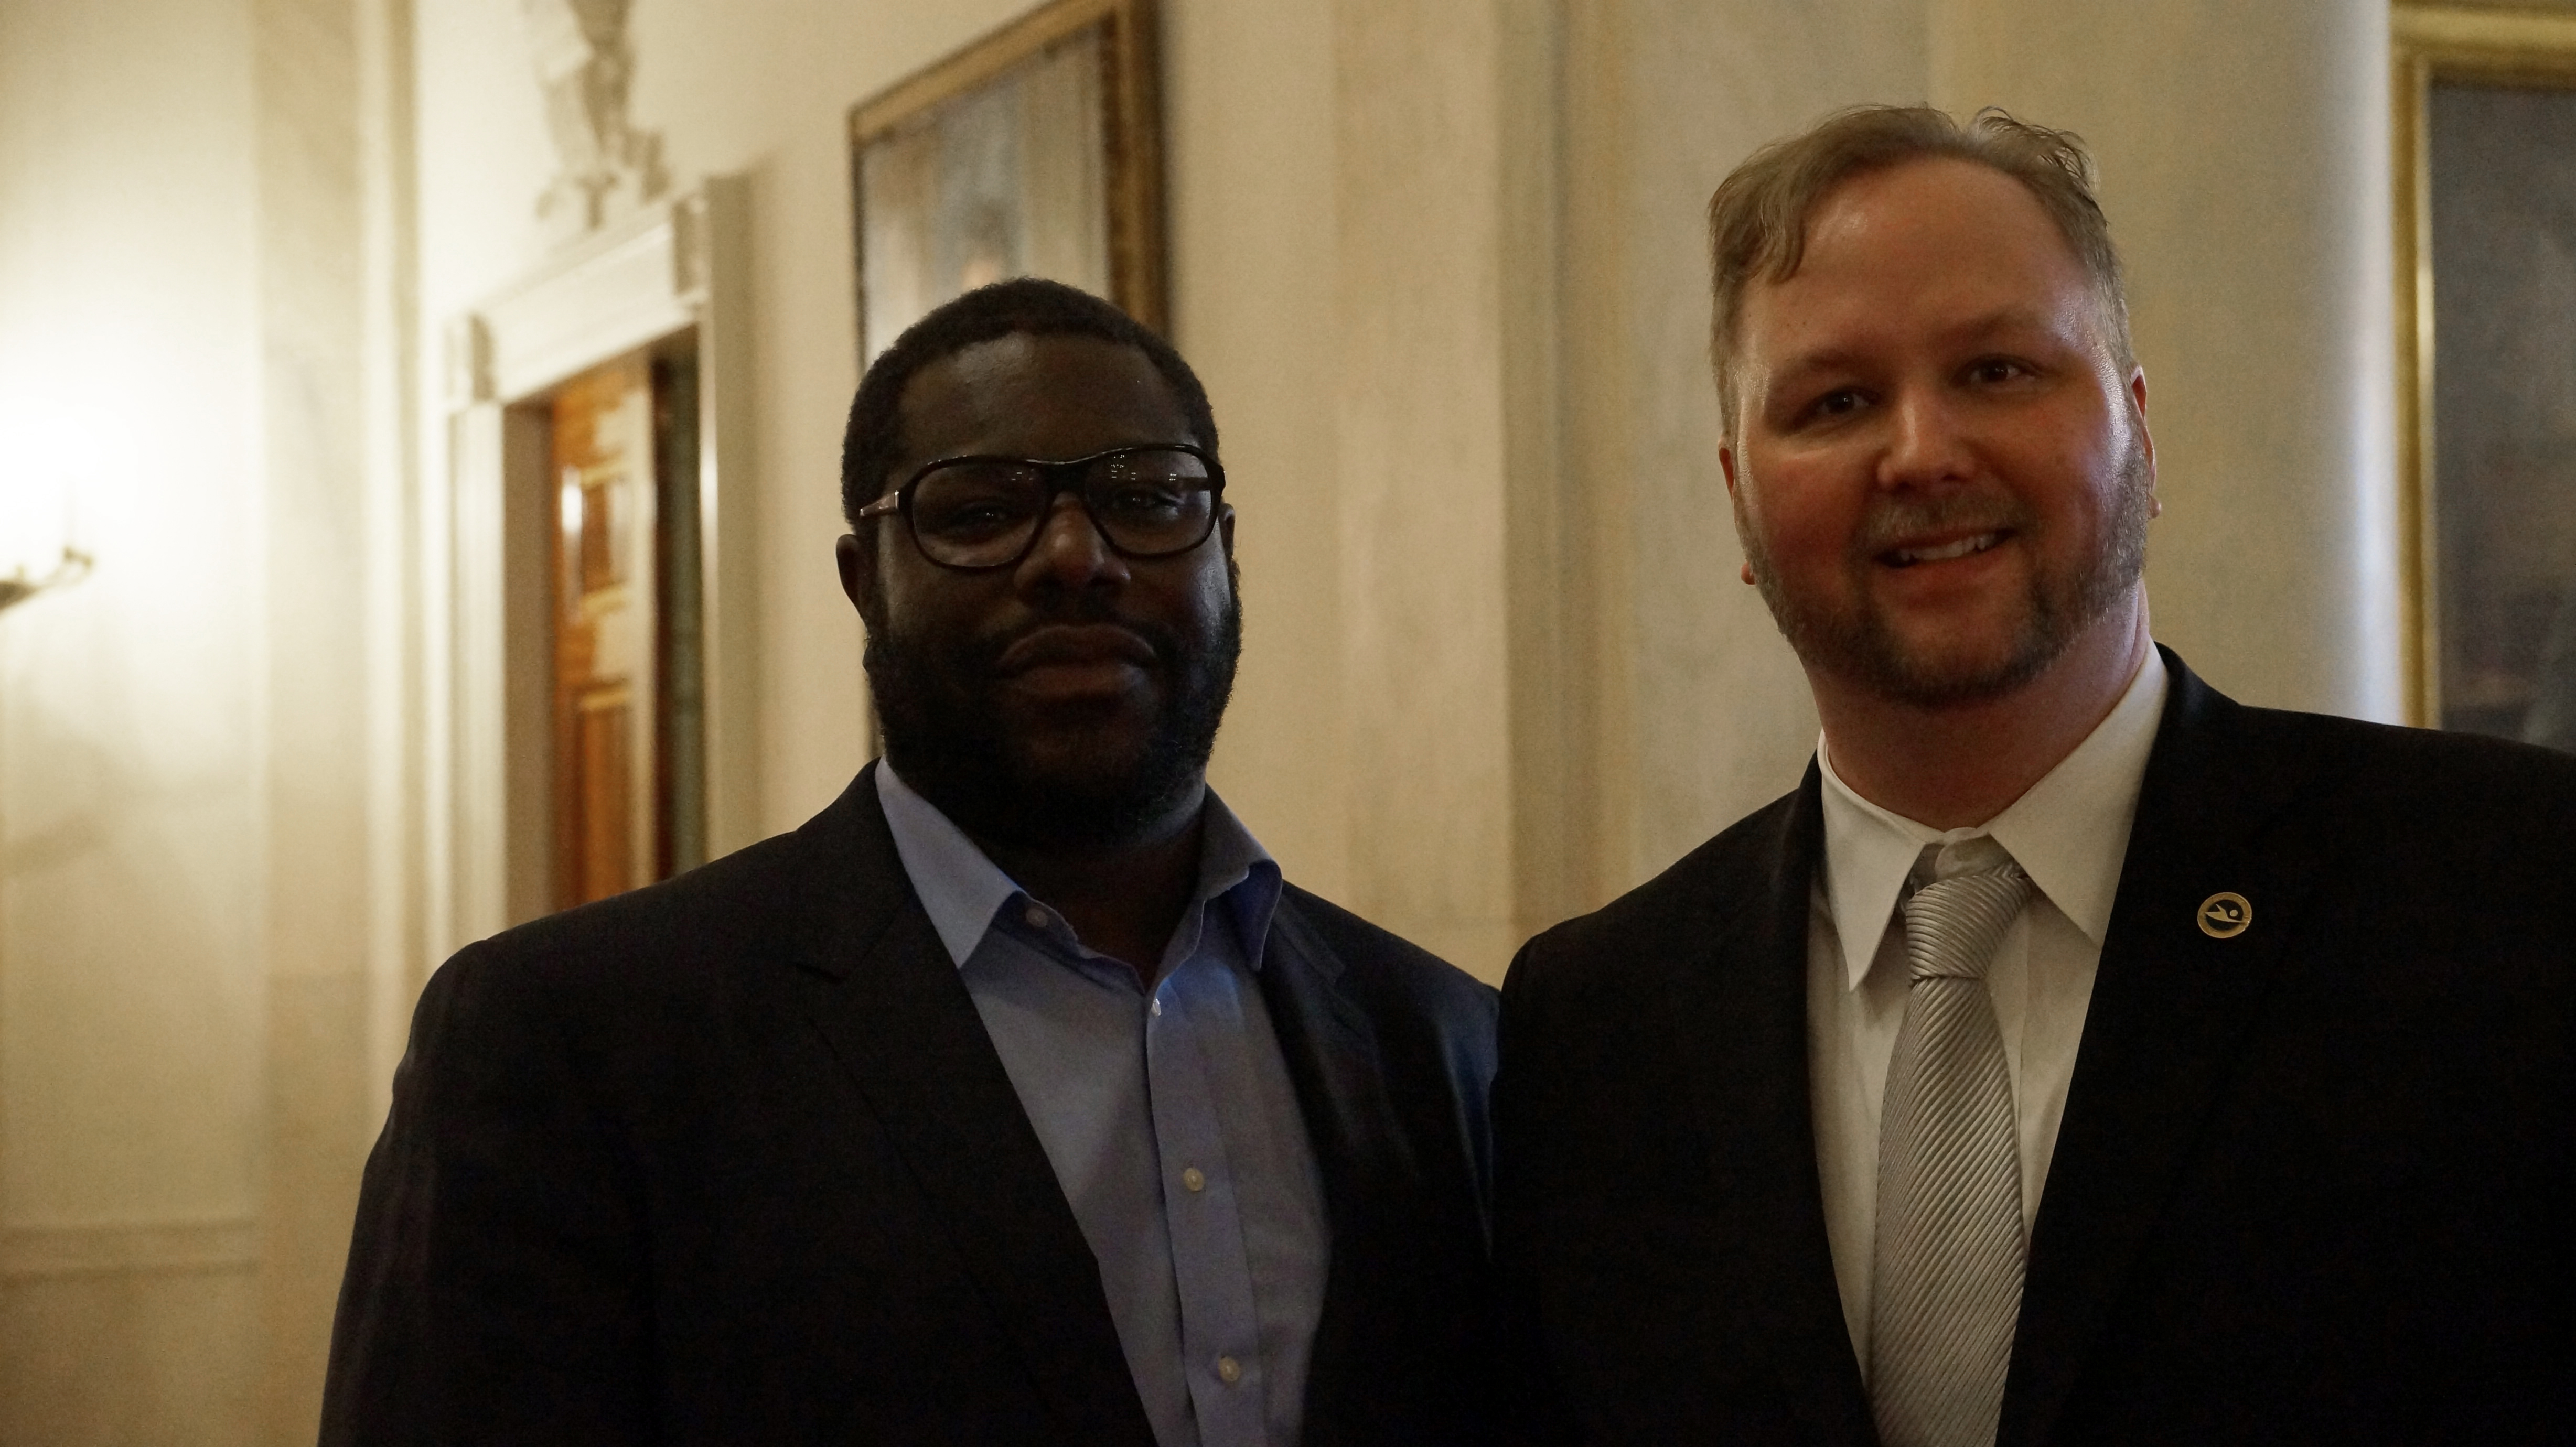 Jeff Doles with Director Steve McQueen at the White House Film Festival